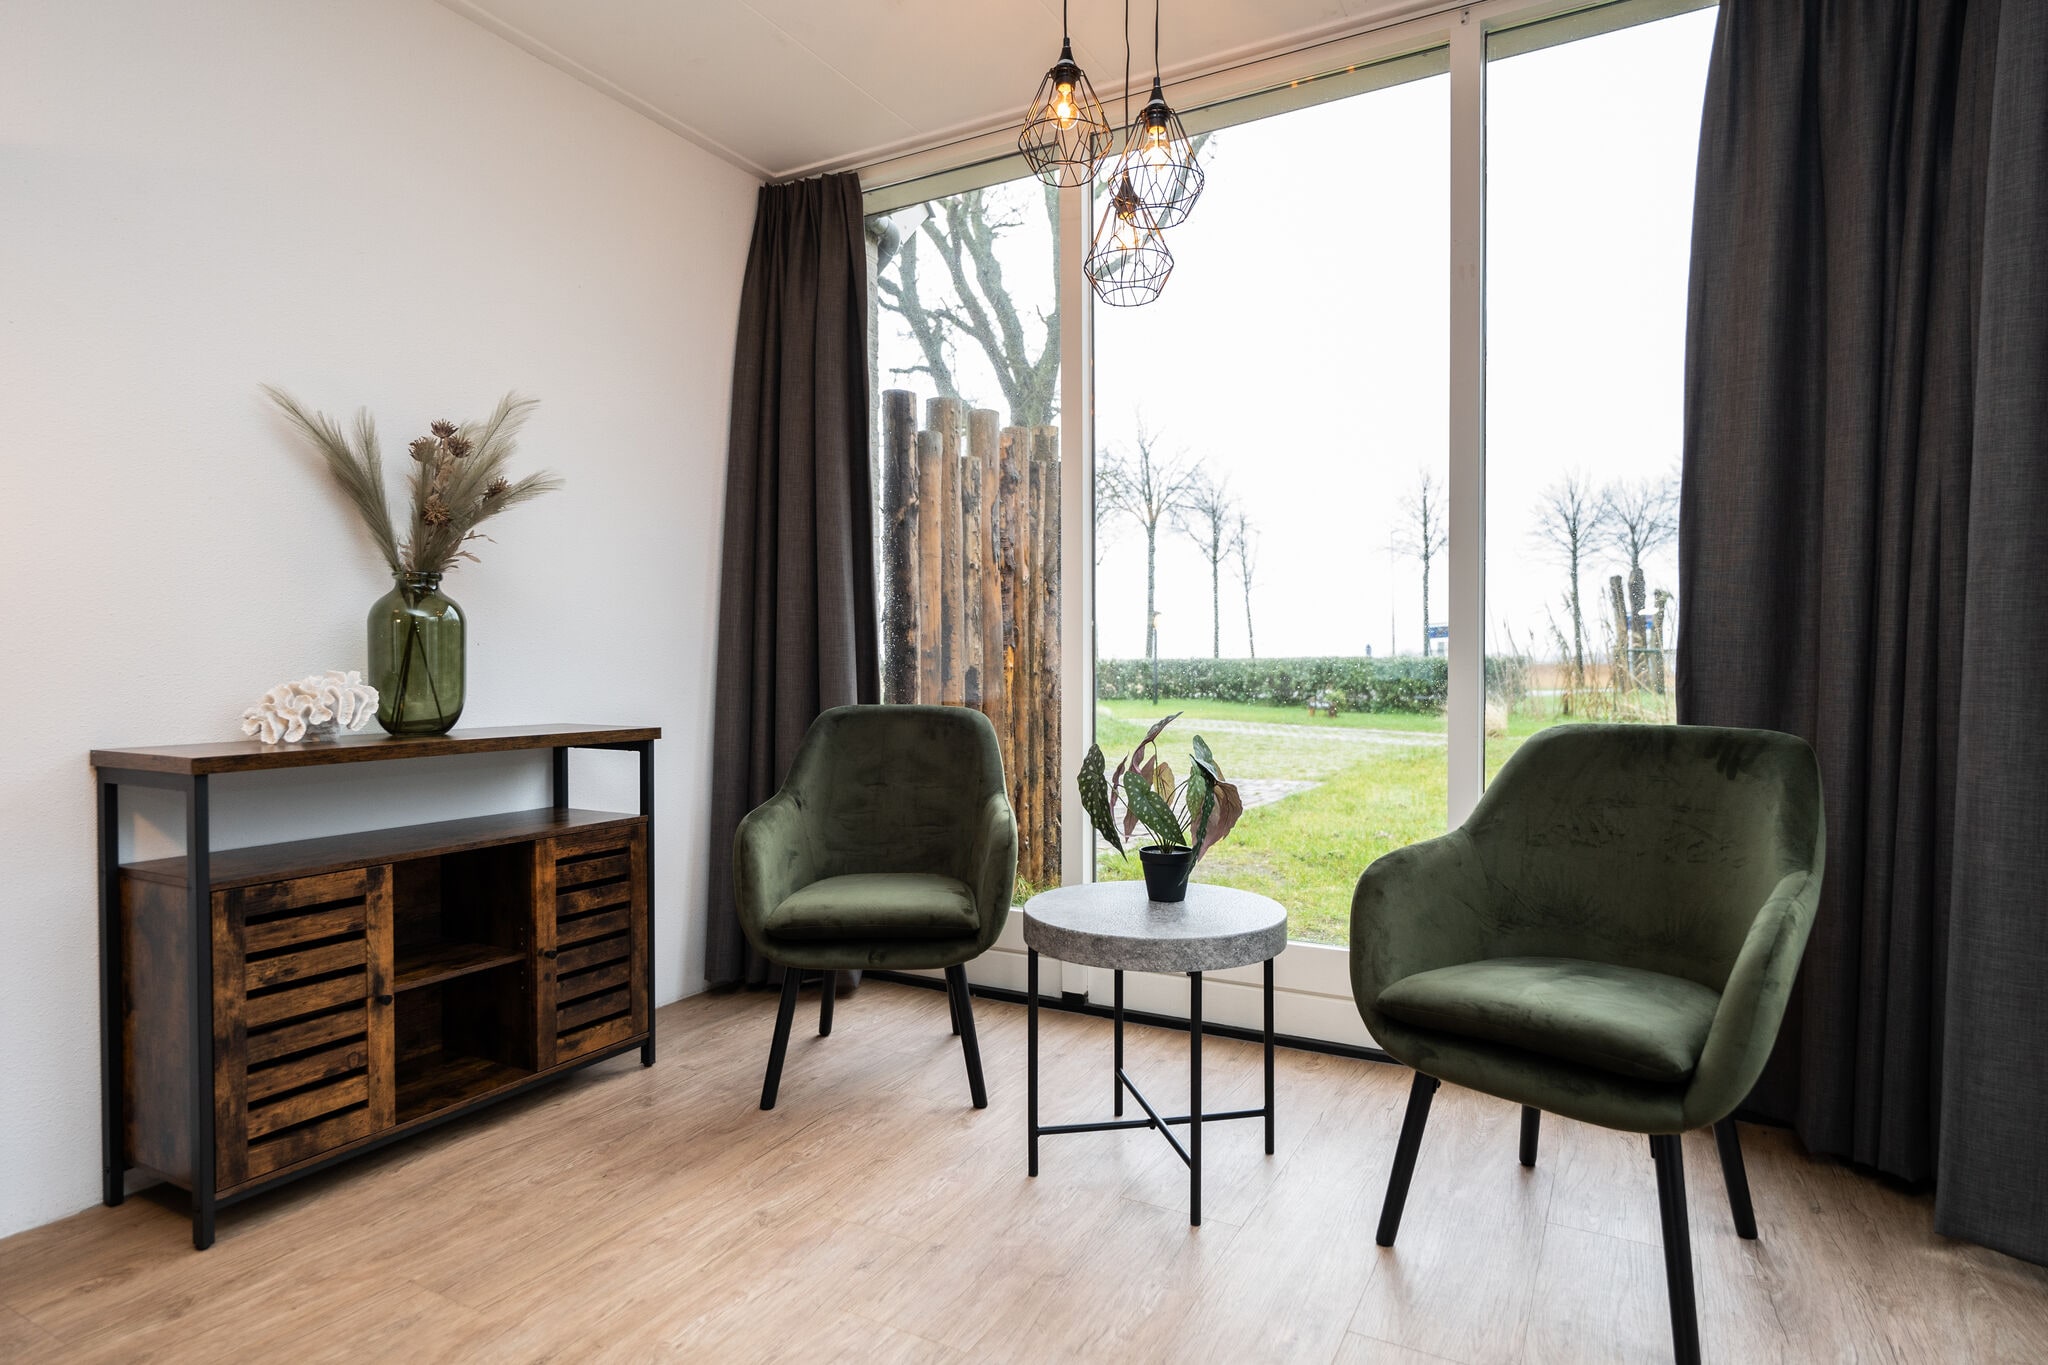 Cozy accommodation with WiFi, located on Texel